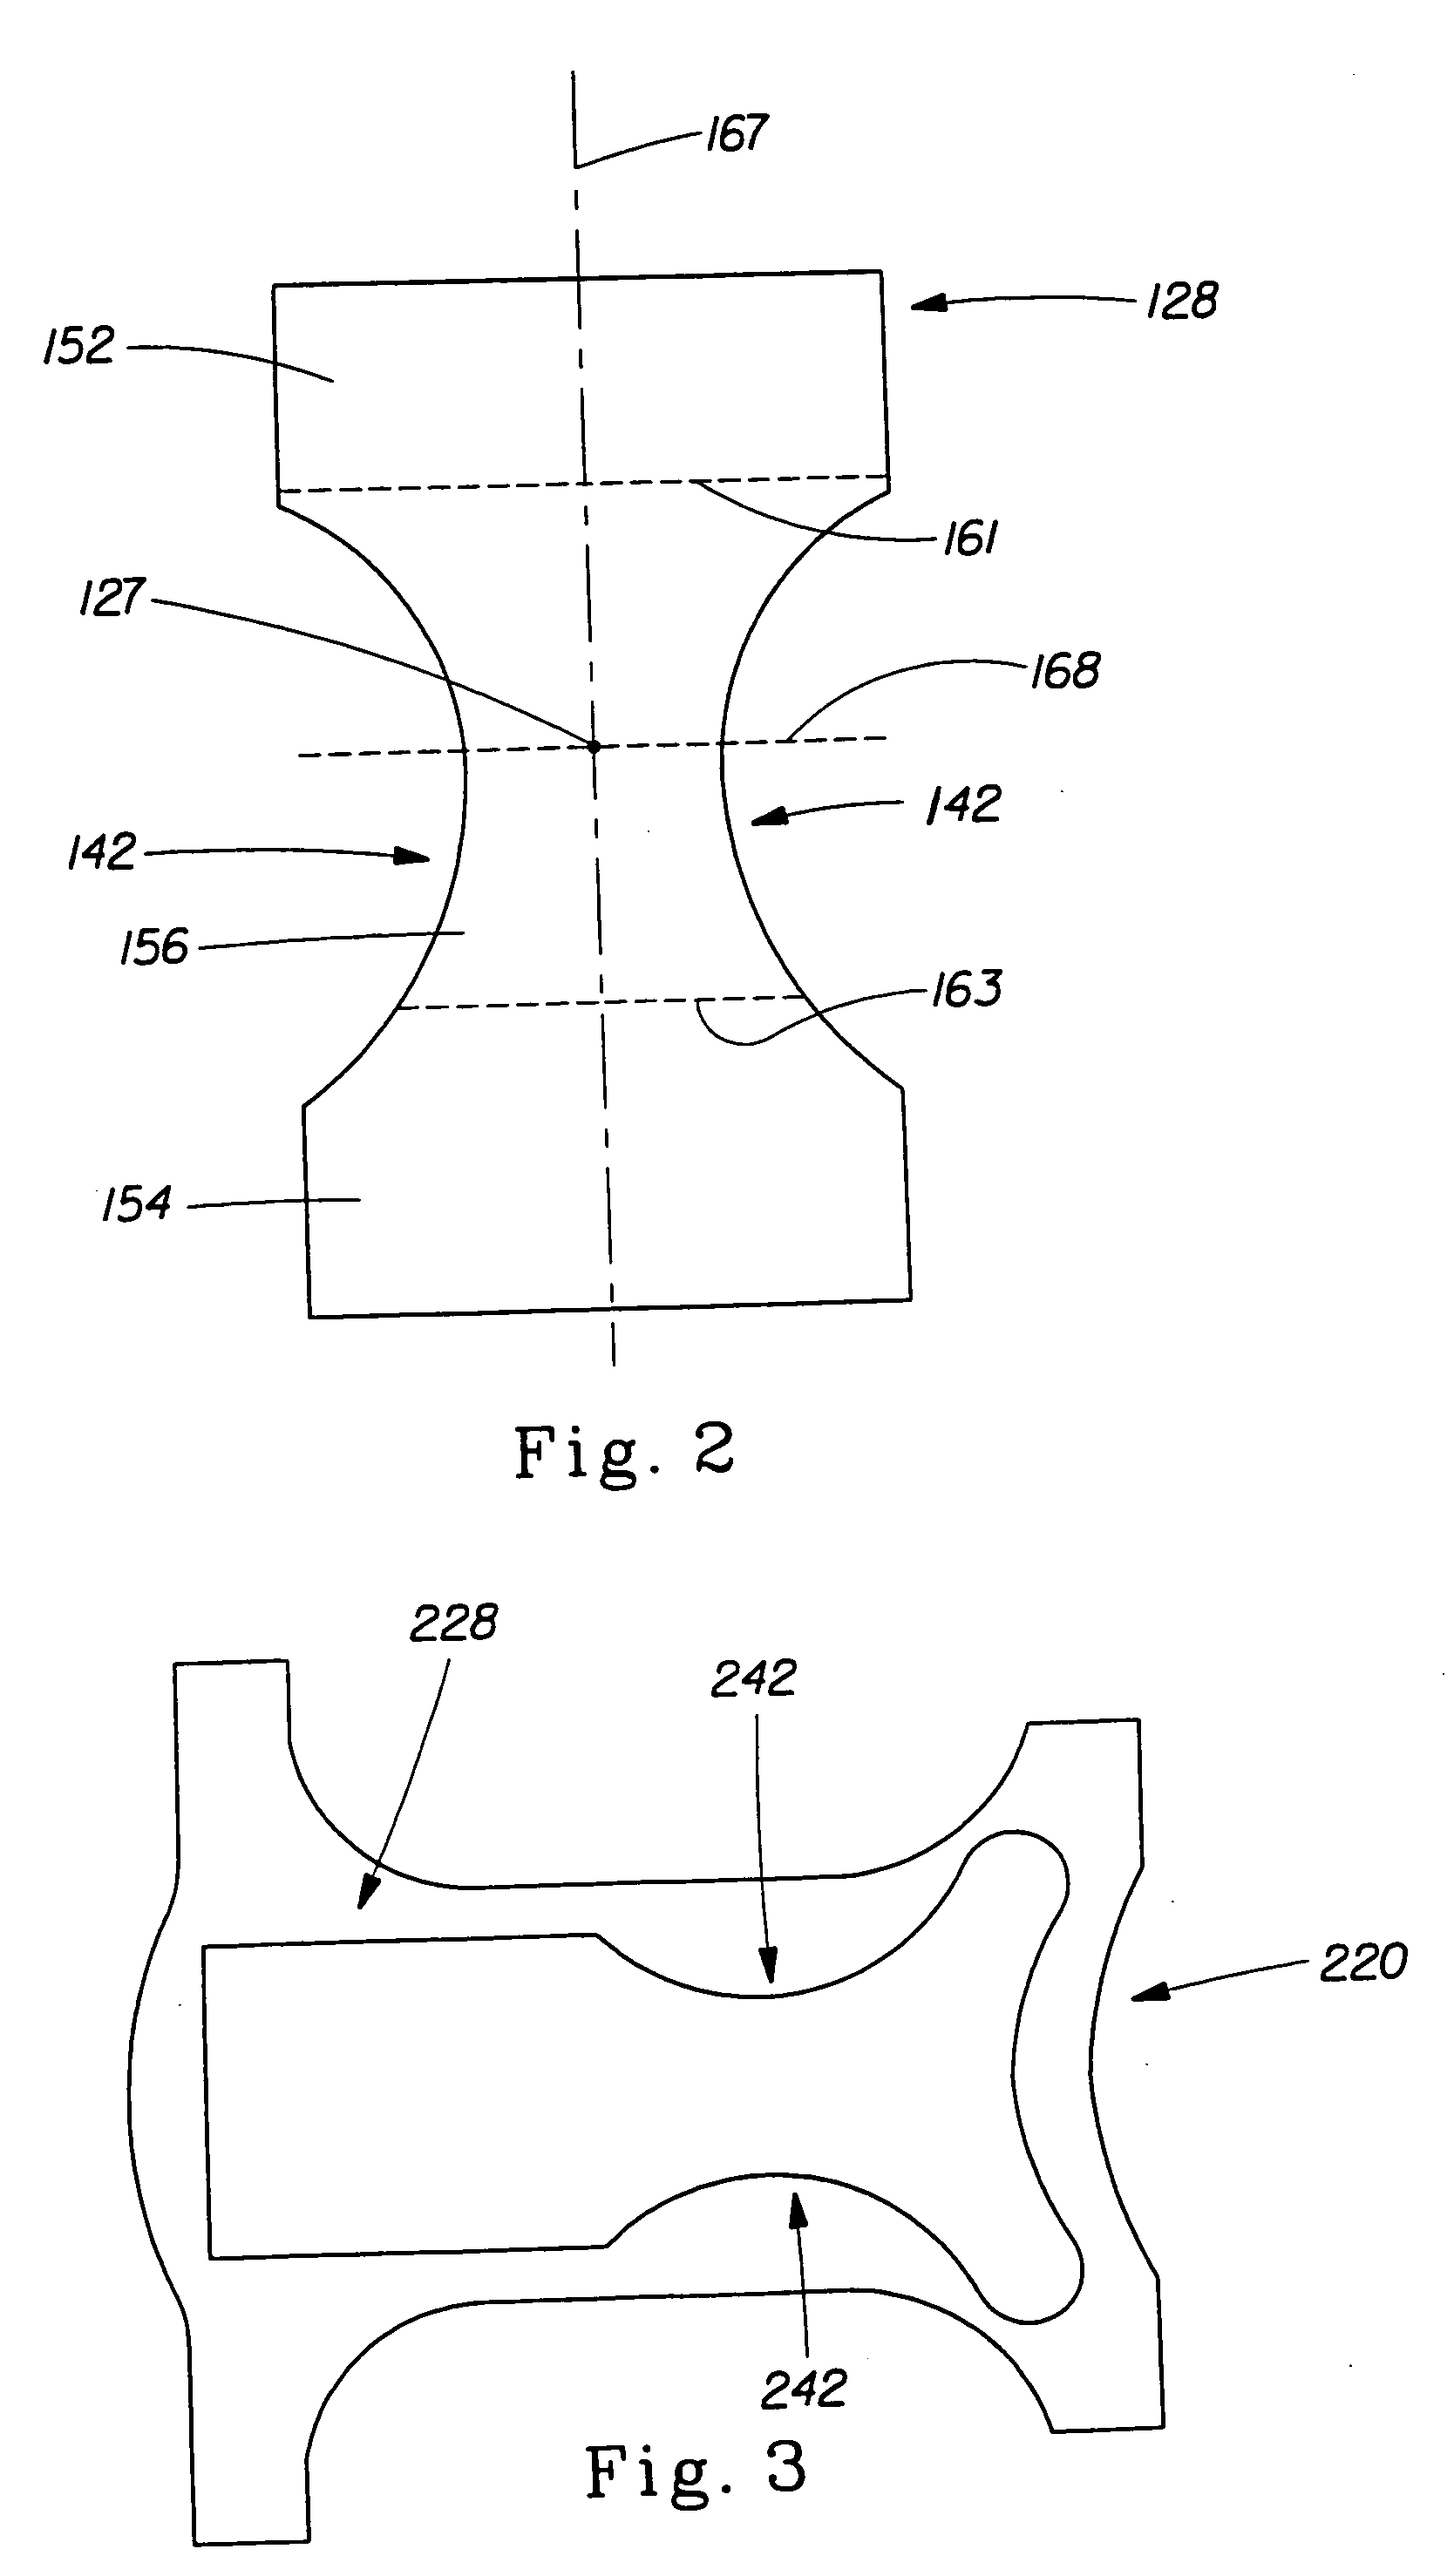 Absorbent article having a replaceable absorbent core component having an insertion pocket